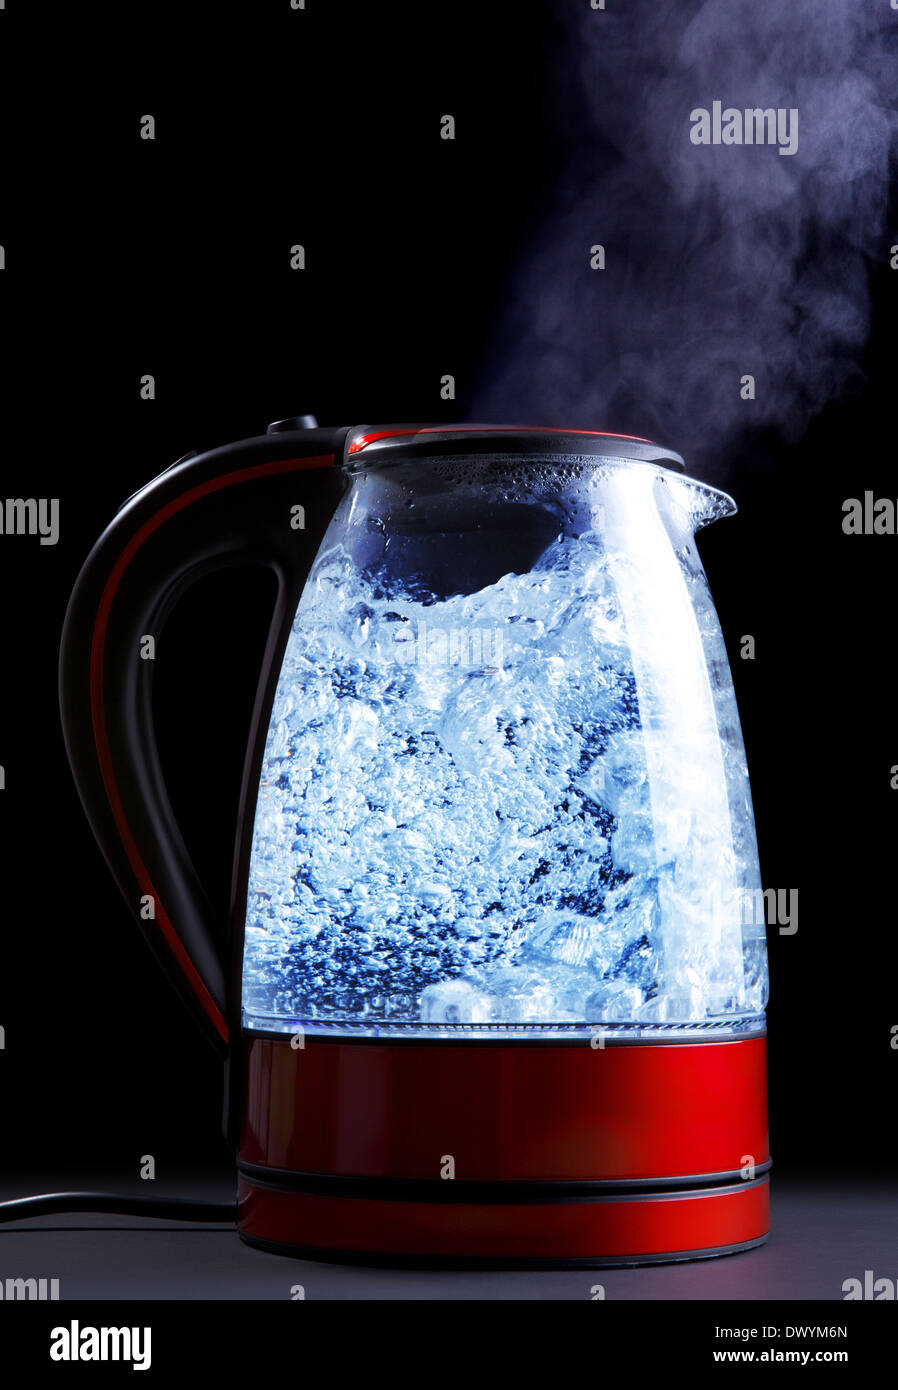 glass electric kettle with boiling water, black background Stock Photo